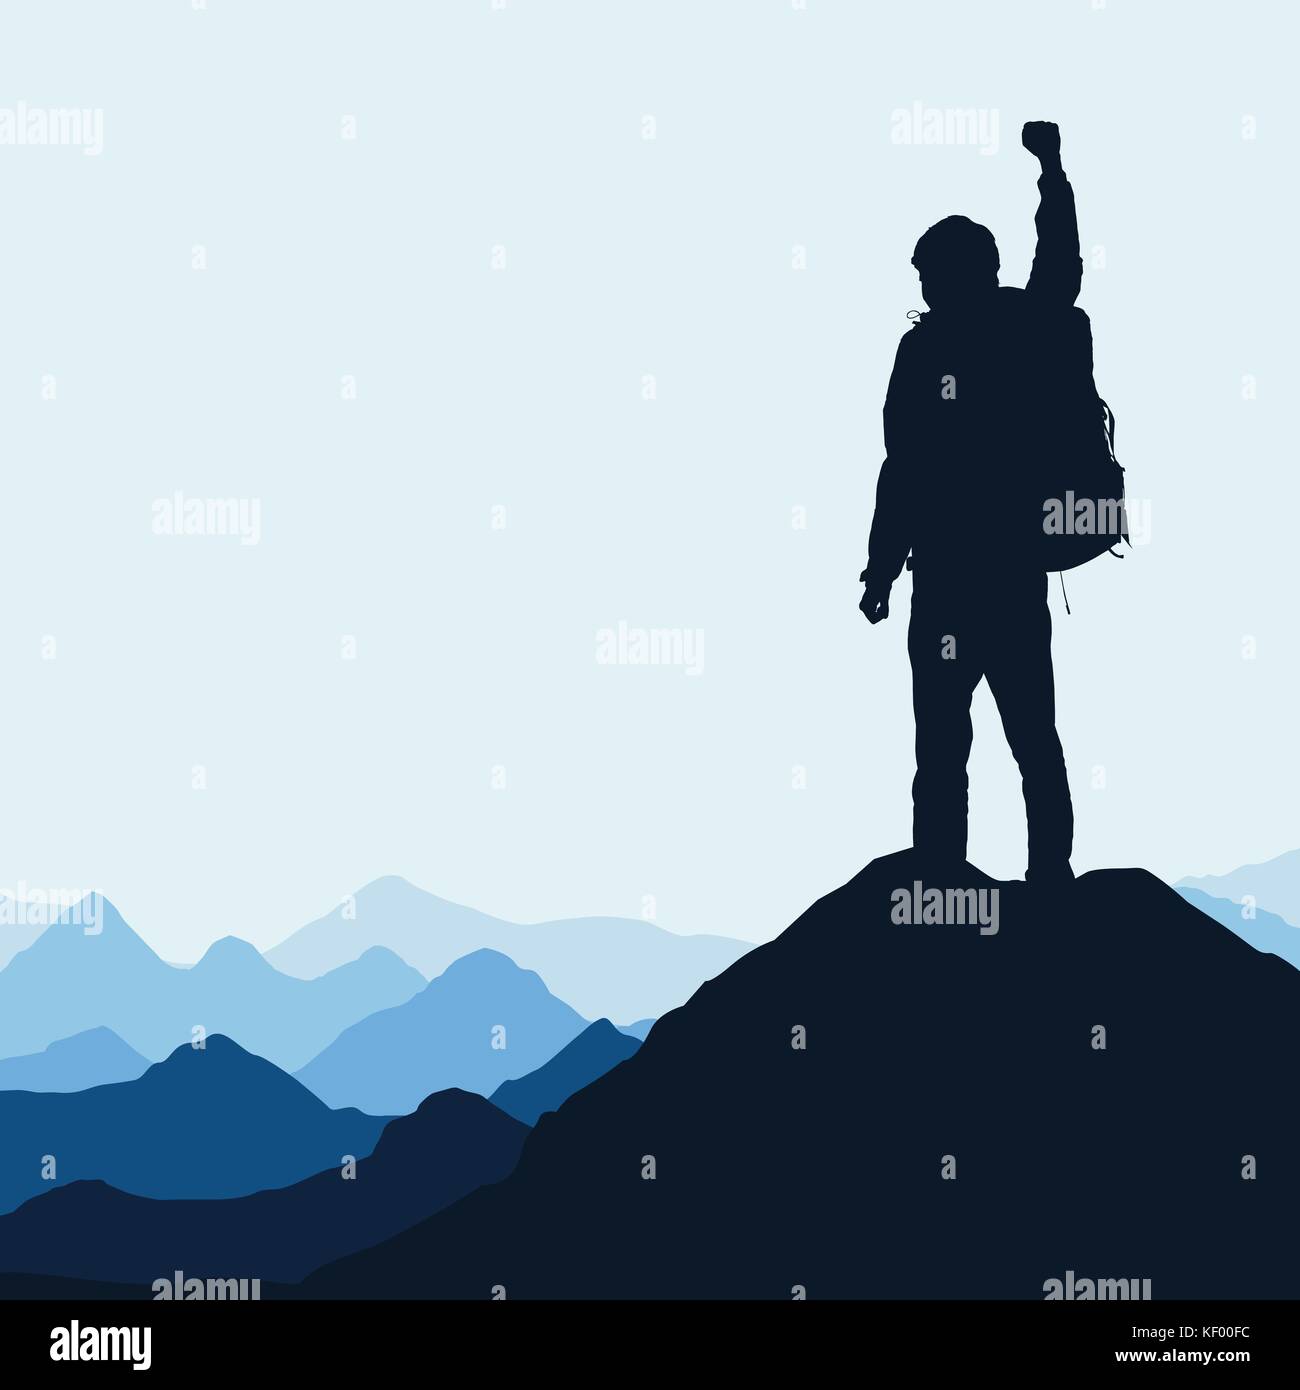 Vector illustration of a mountain landscape with a realistic silhouette of a climber at the top of a rock with a winning gesture under a blue sky Stock Vector